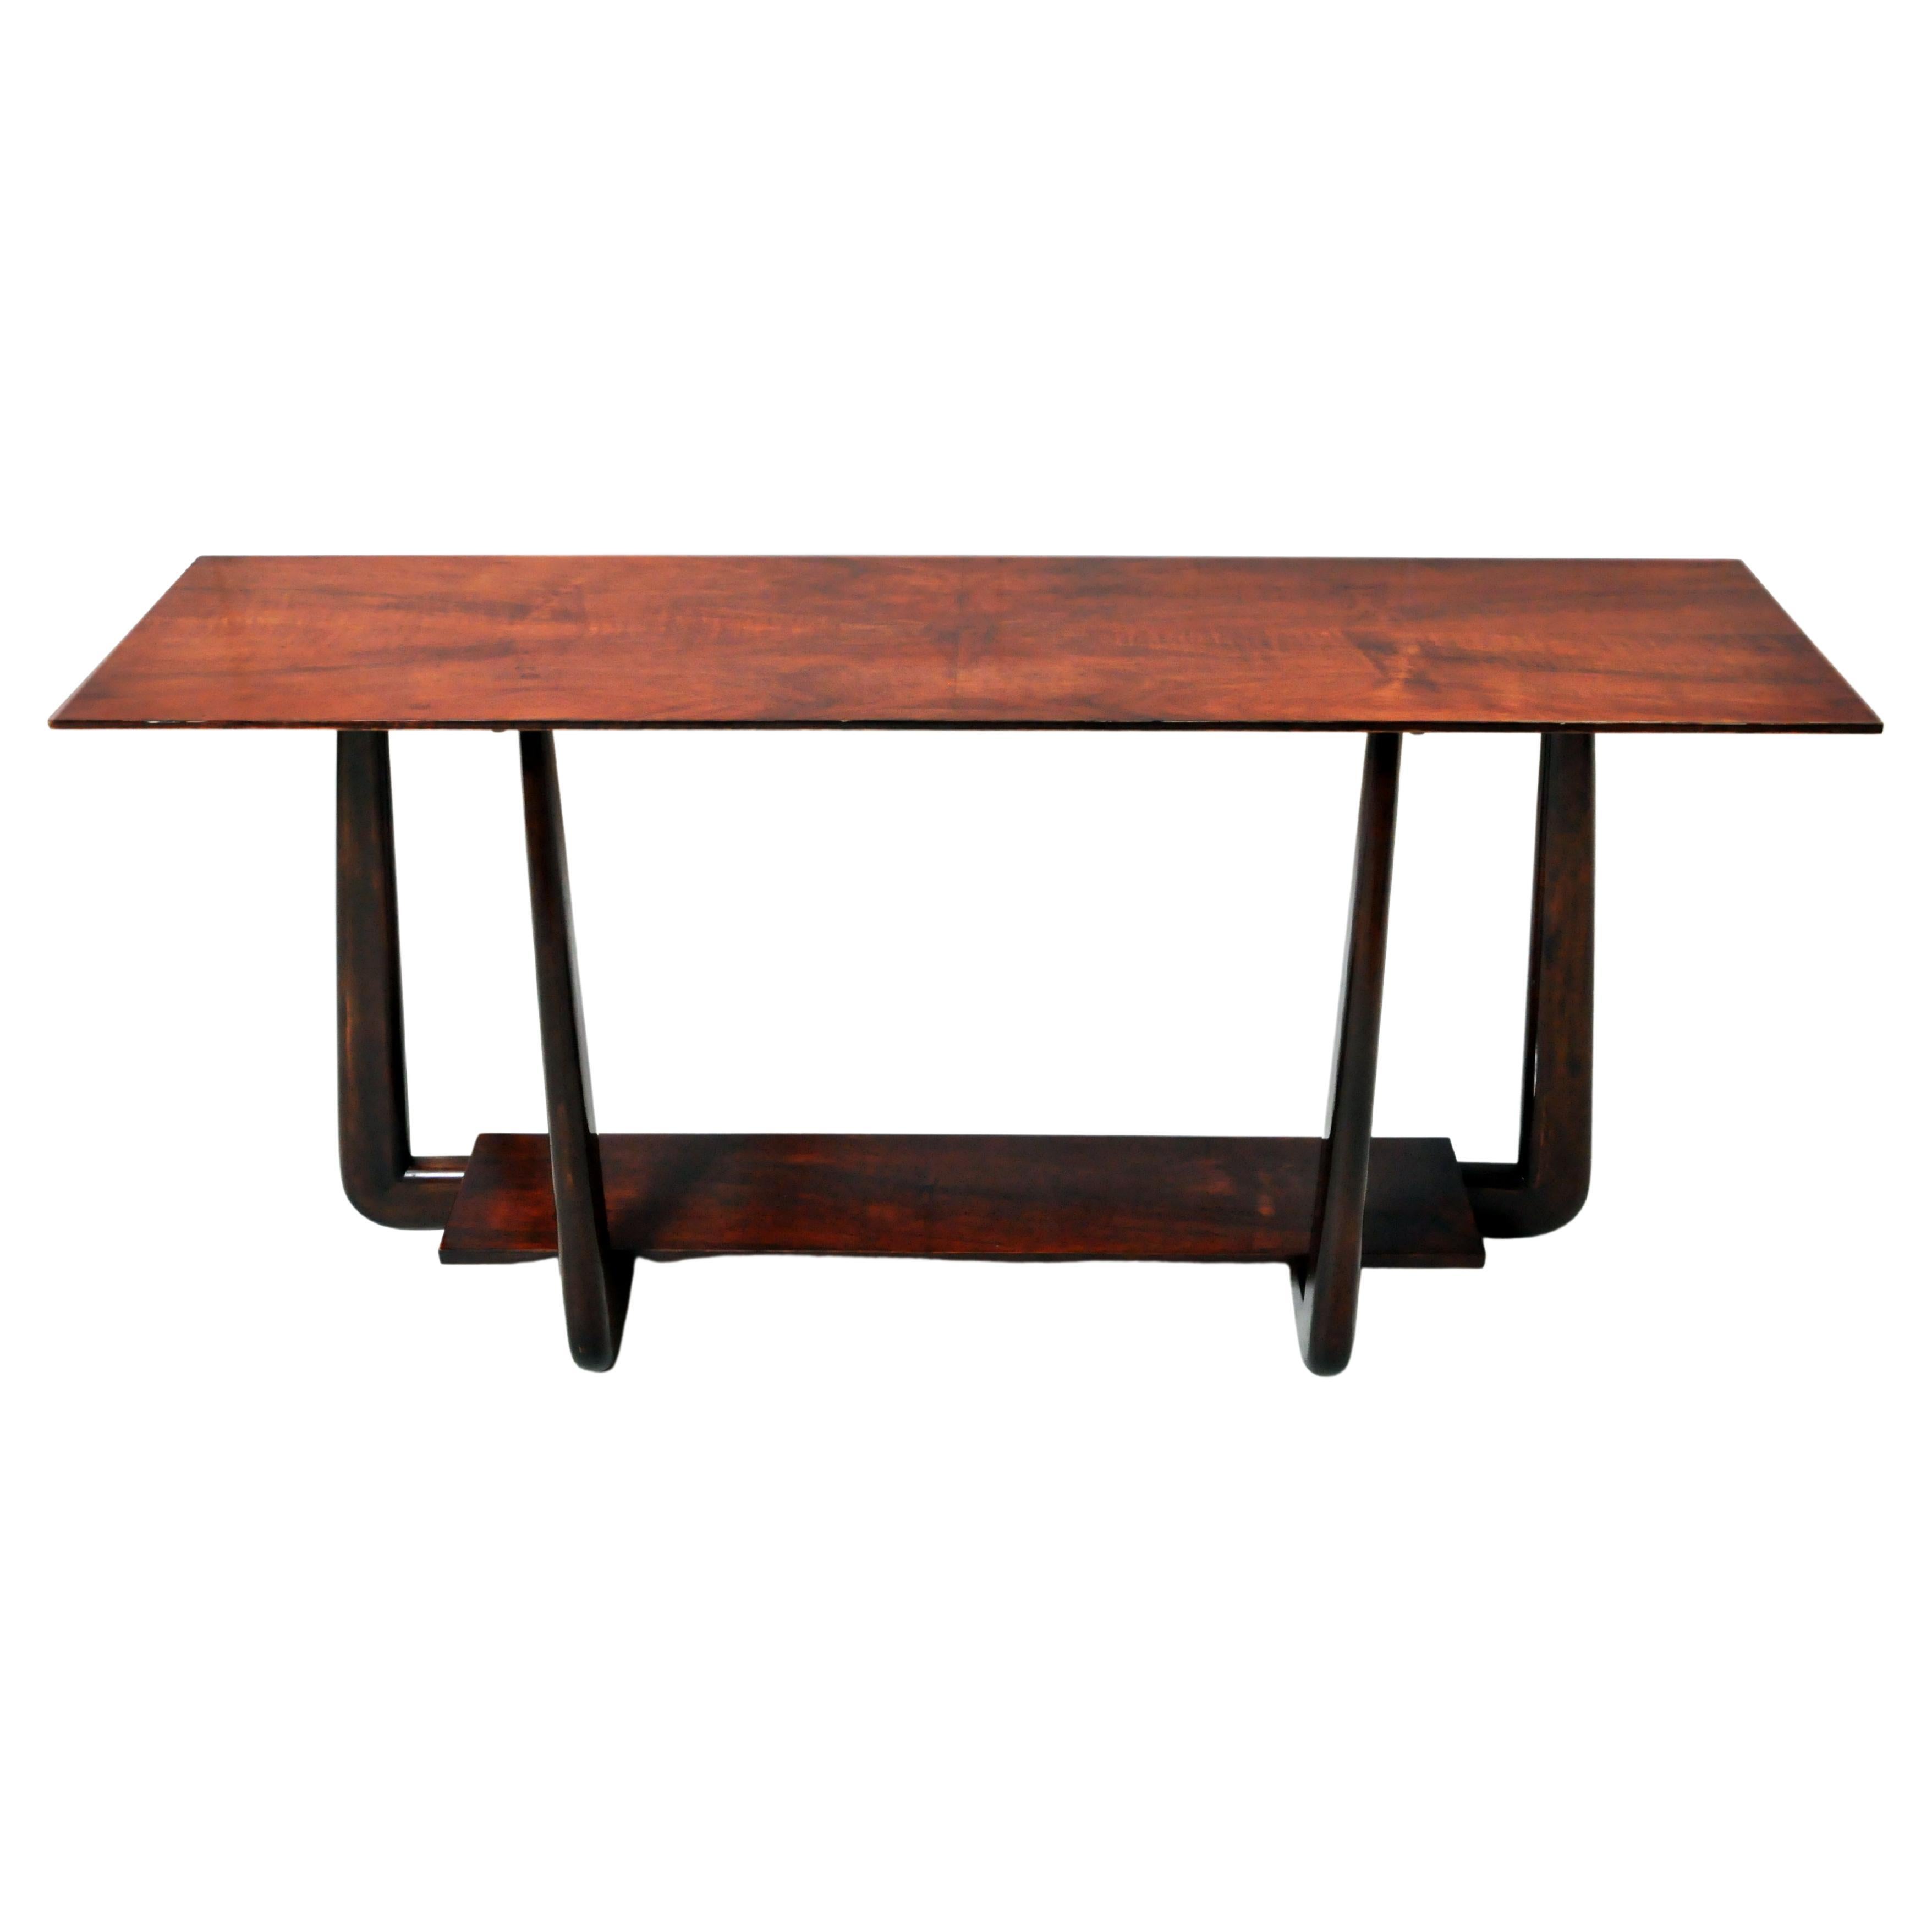 Console Table with Walnut Veneer